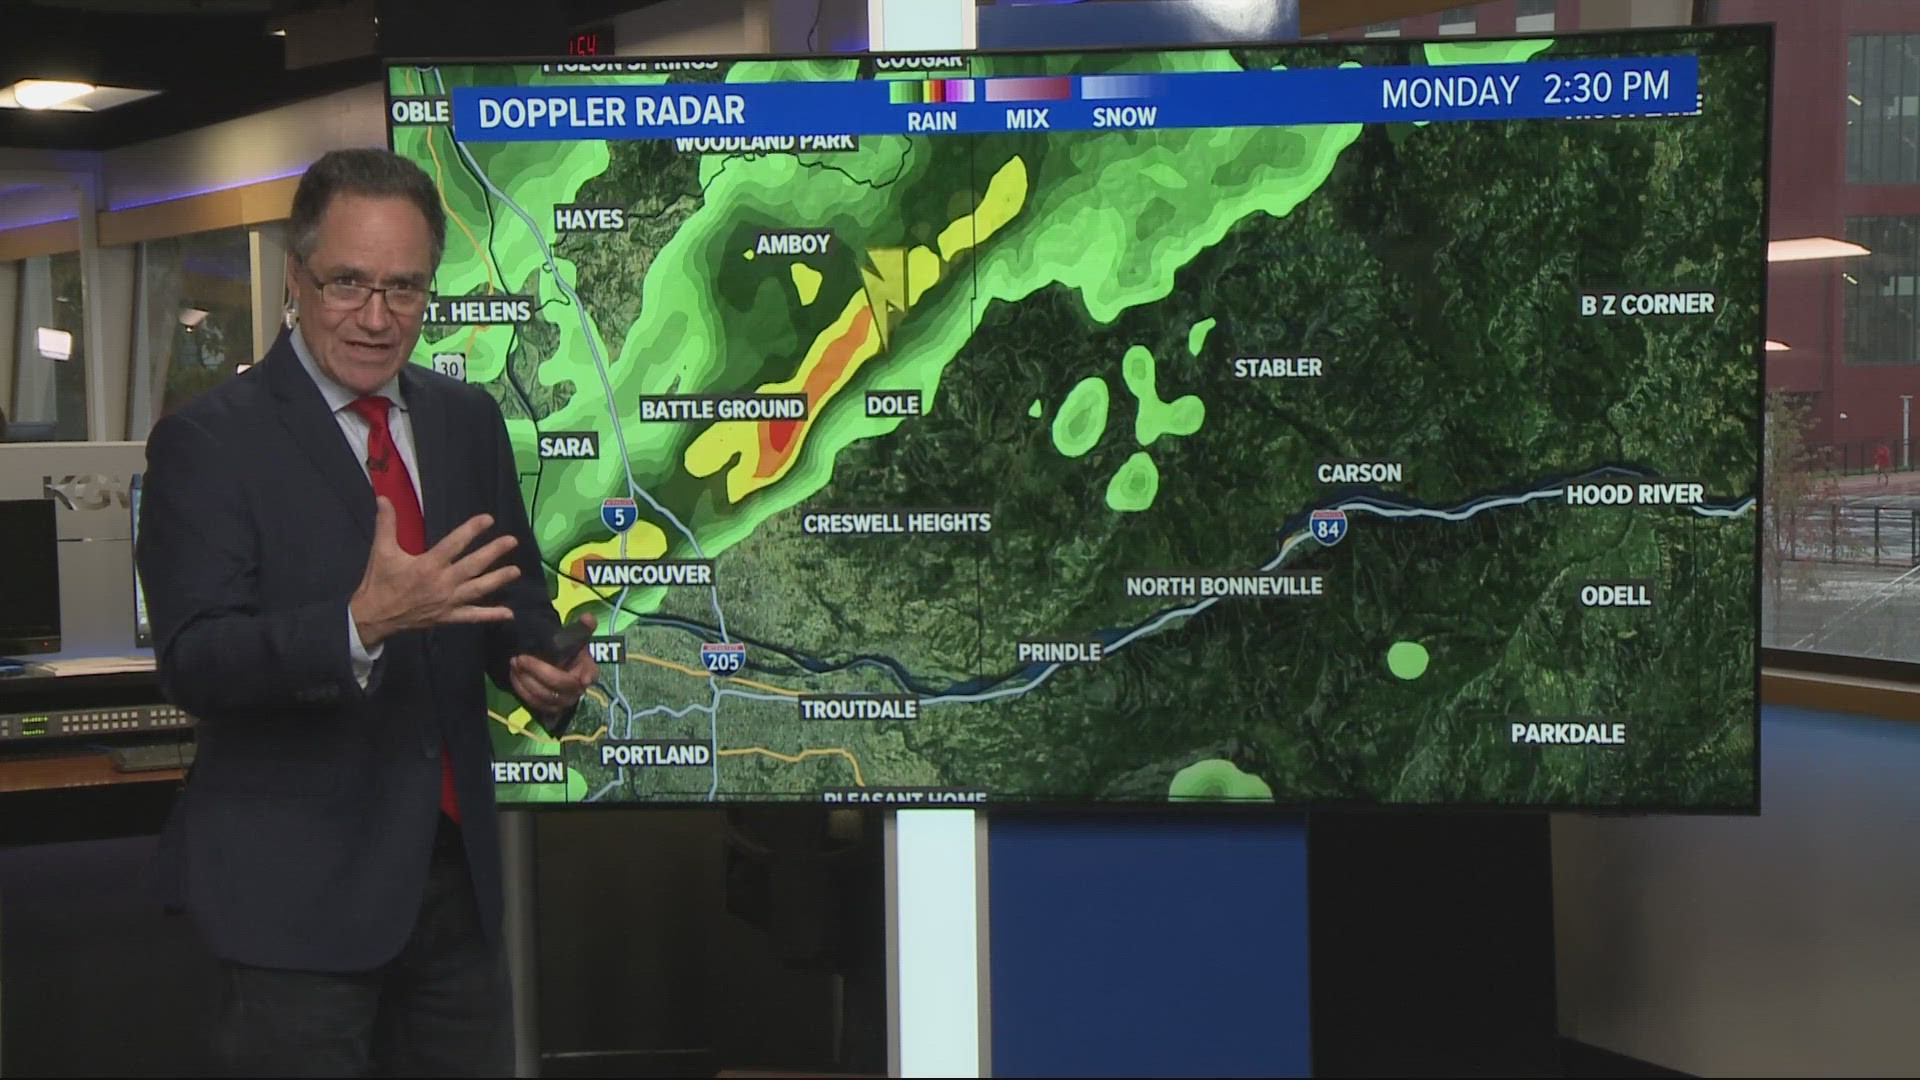 Chief Meteorologist Matt Zaffino explained that radar detected rotation in the weather system, resulting in that warning, but it did not seem to touch down.